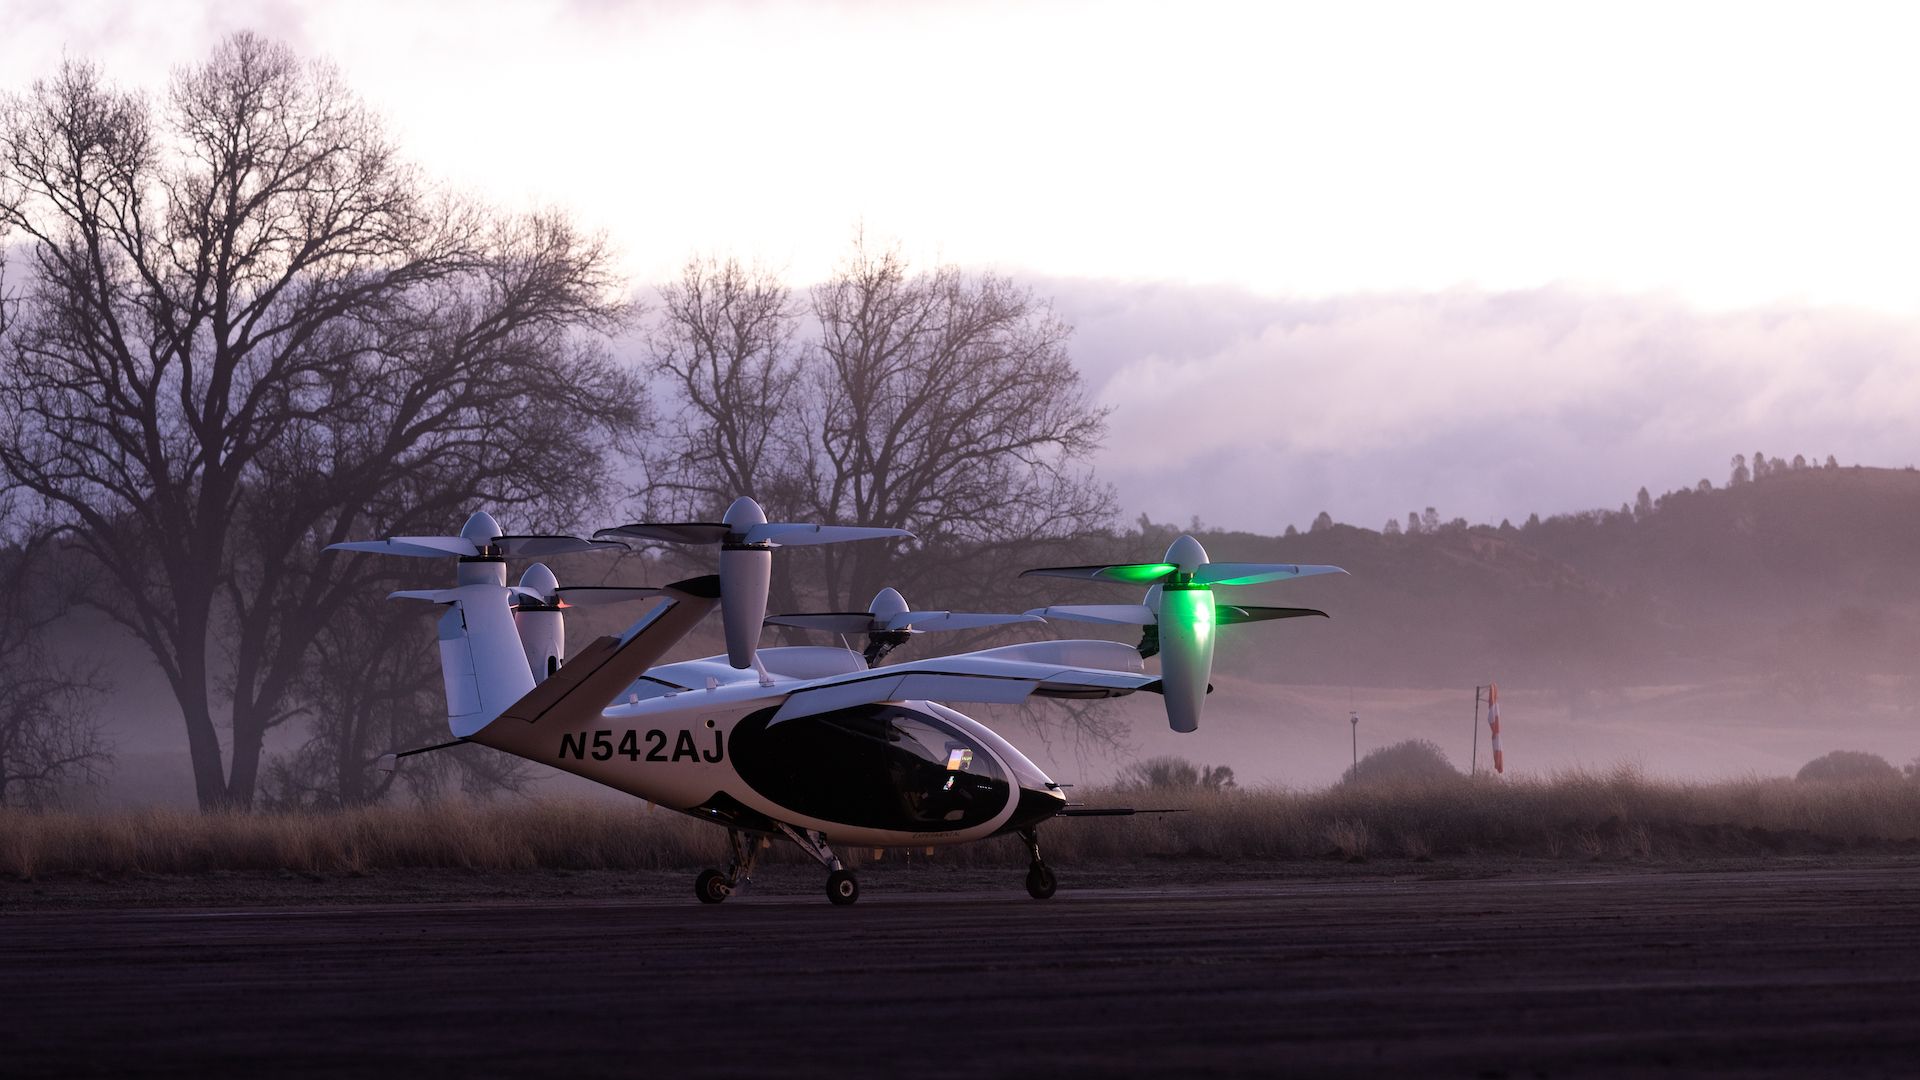 Joby electric air taxi sitting at an airfield.